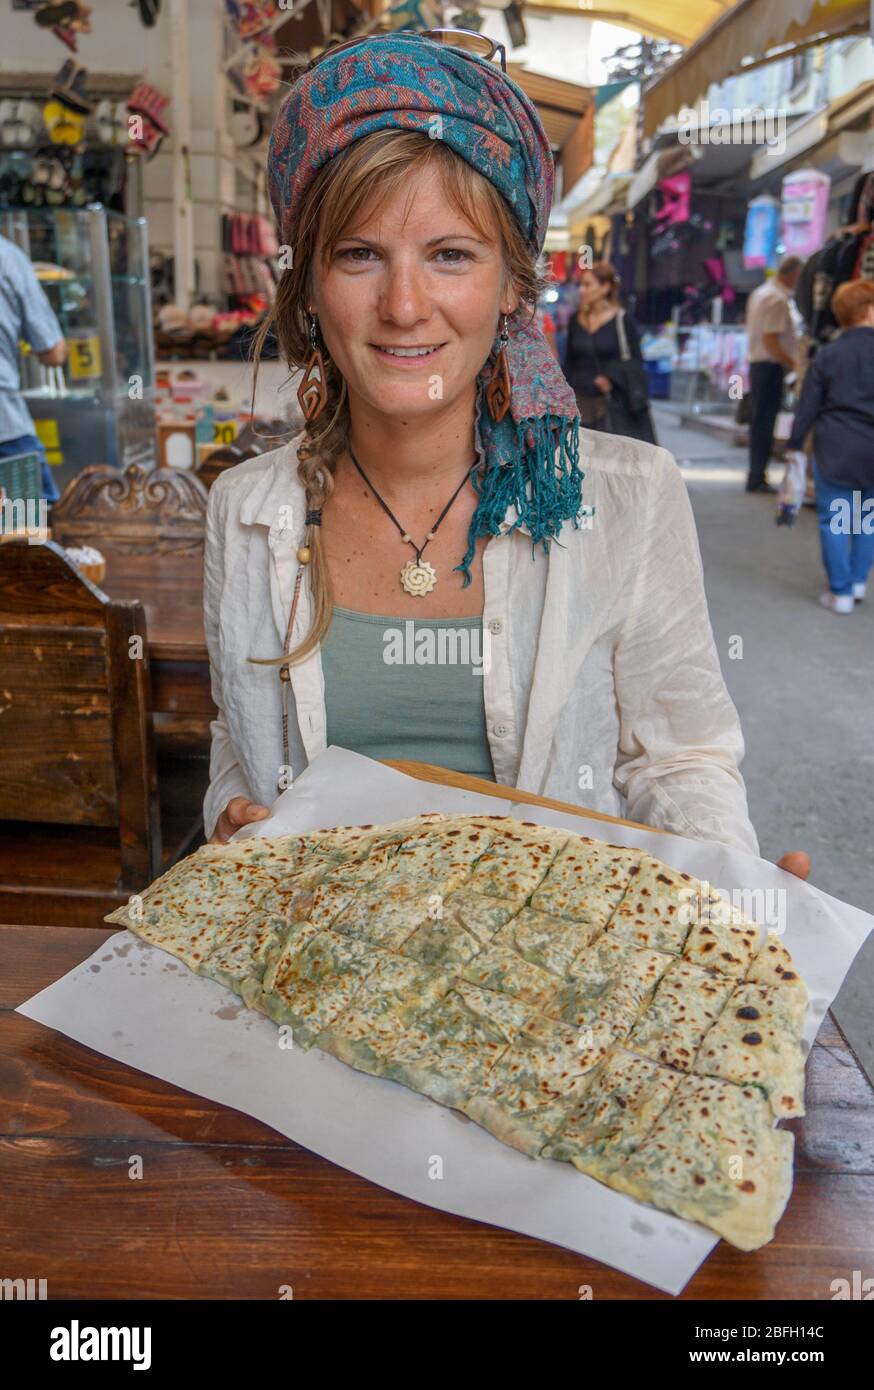 Typical Turkish meal big Gozleme with spinach and mushroom on light wooden cutting board hold by a woman with headscarf in the streets of Istanbul Stock Photo